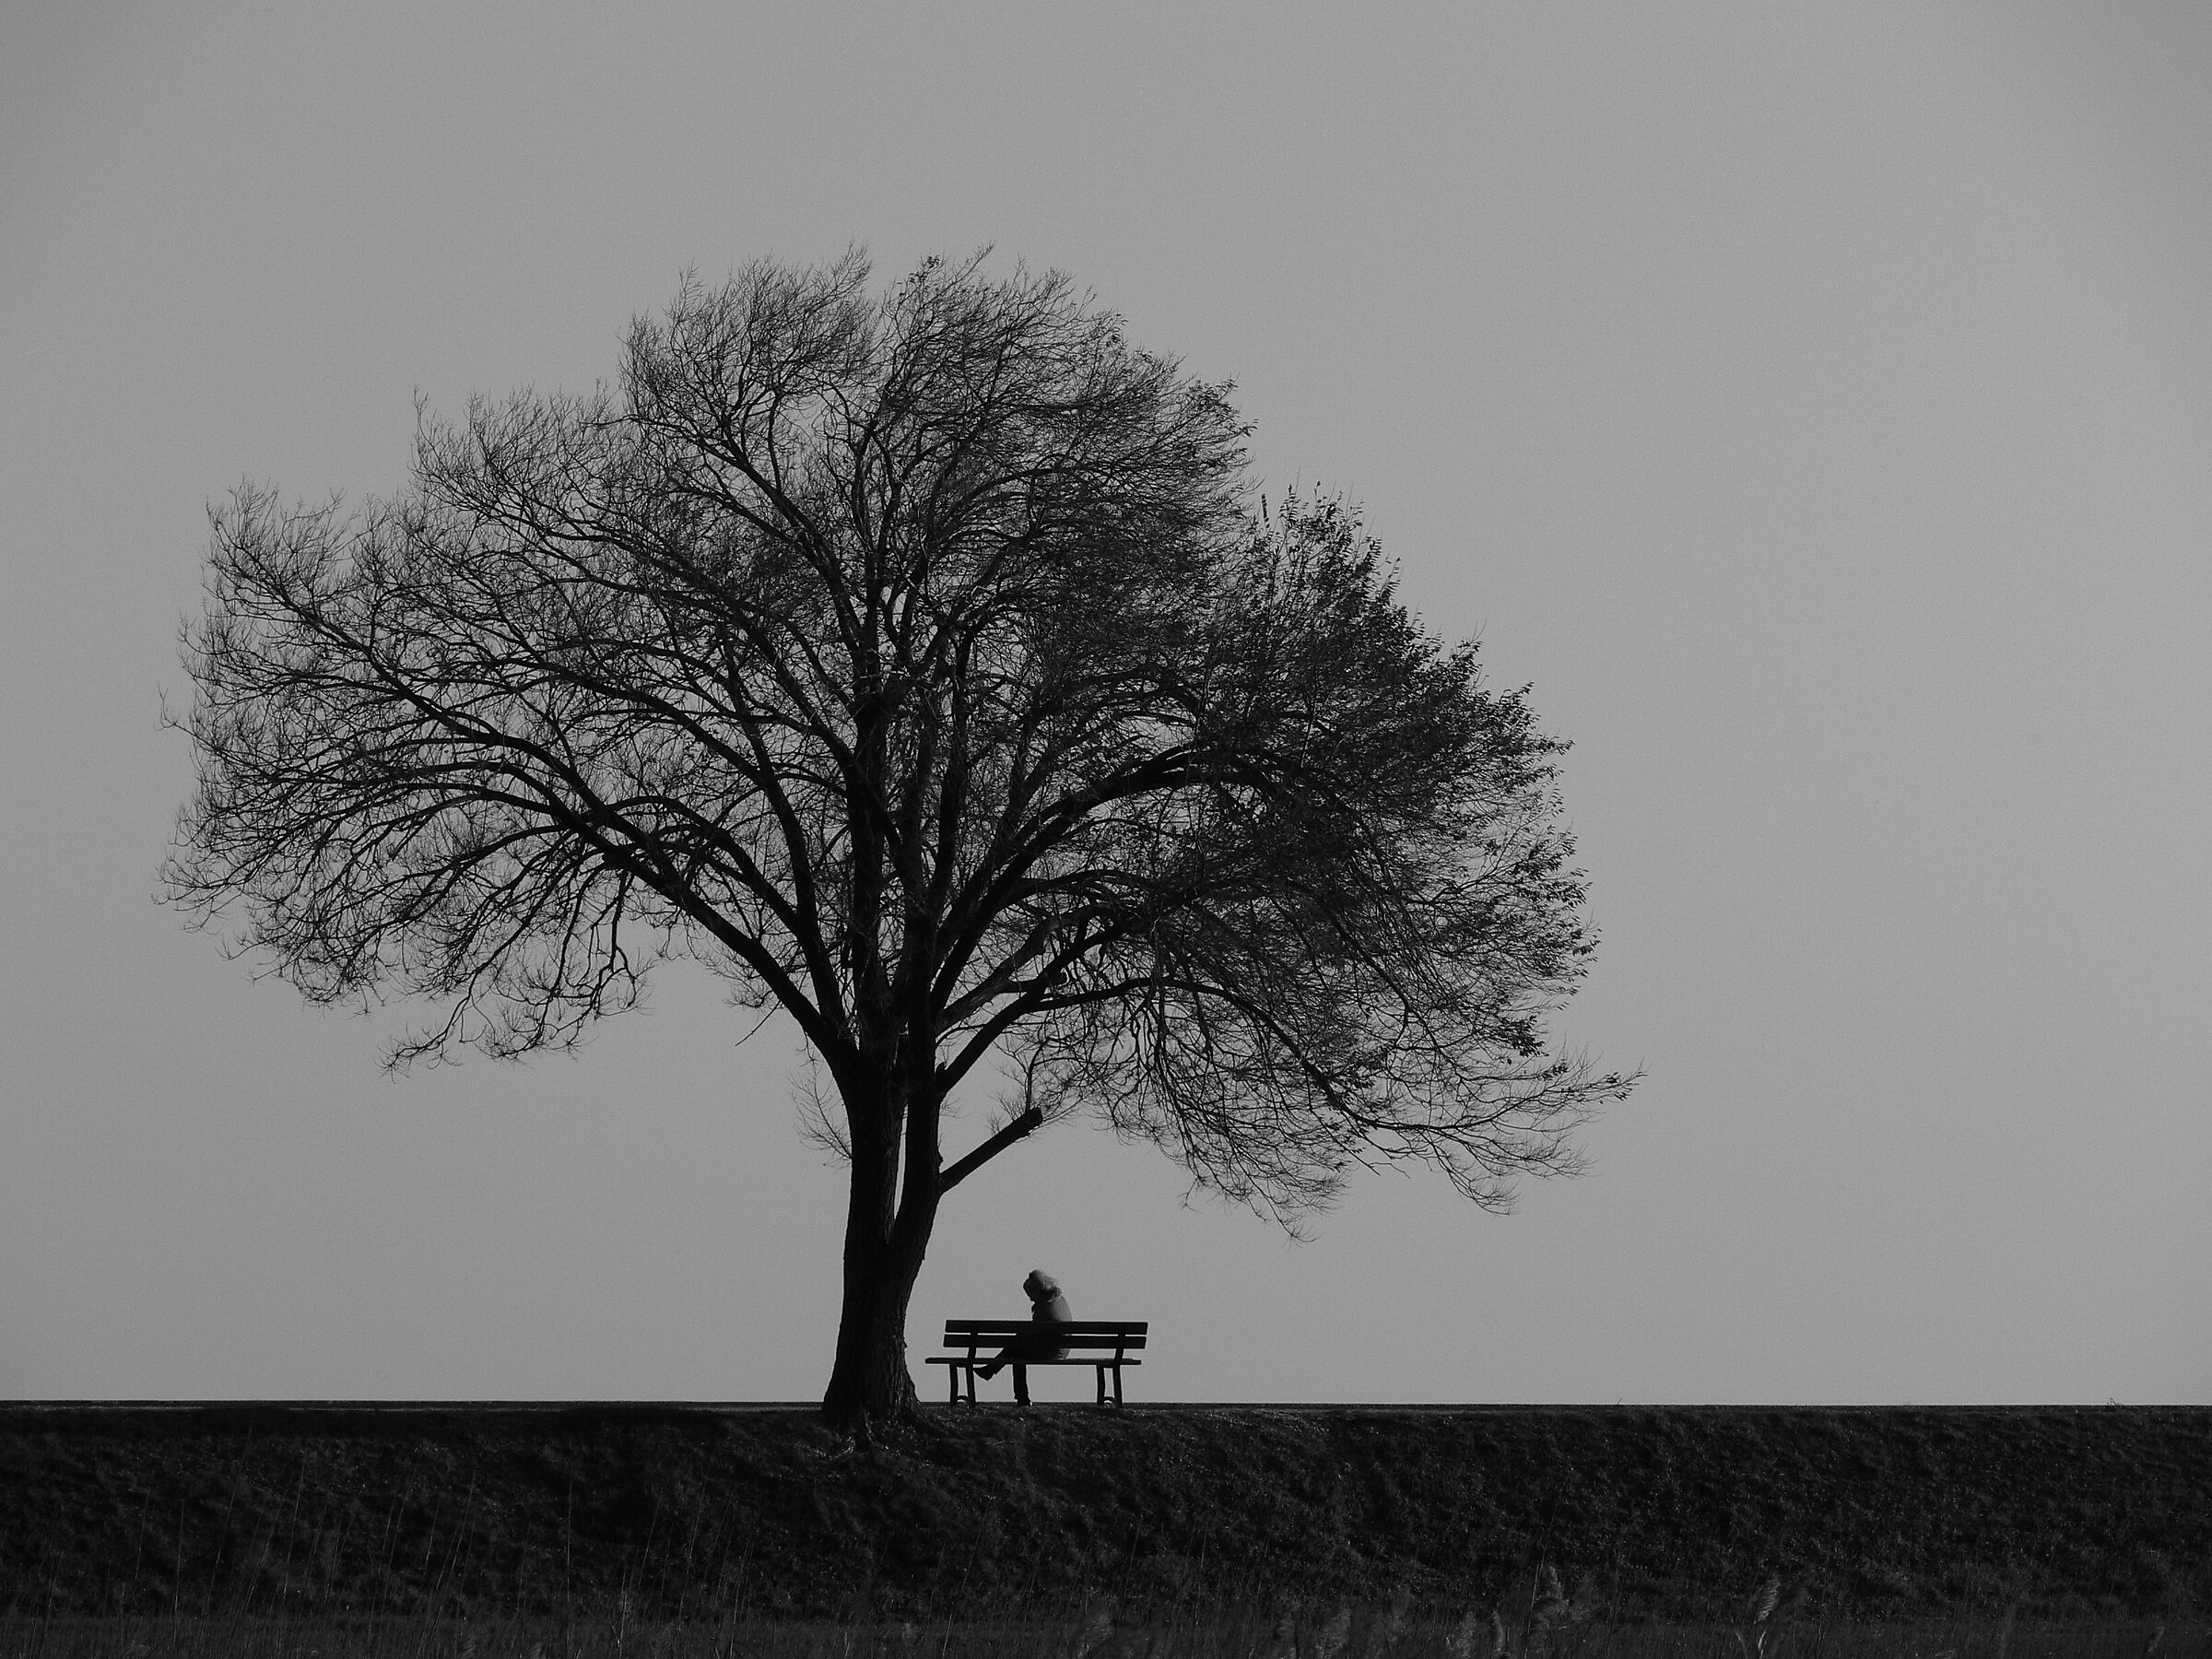 Tree and bench... witnesses of life ...